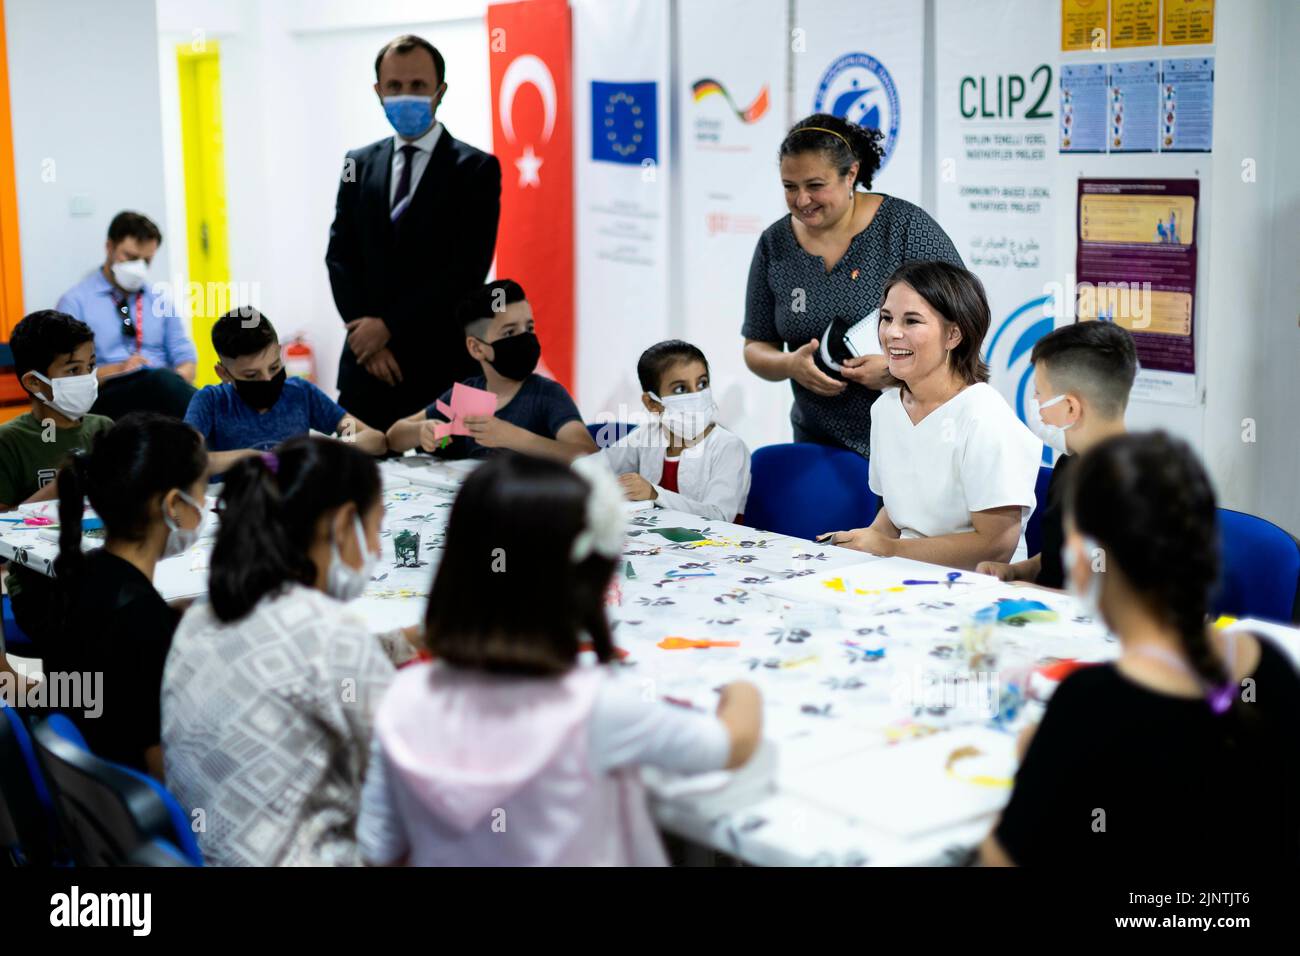 Federal Foreign Minister Annalena Baerbock visited a community center for Iraqi and Syrian refugees in Ankara, July 30, 2022. Copyright: Leon Kuegeler/photothek.de Stock Photo